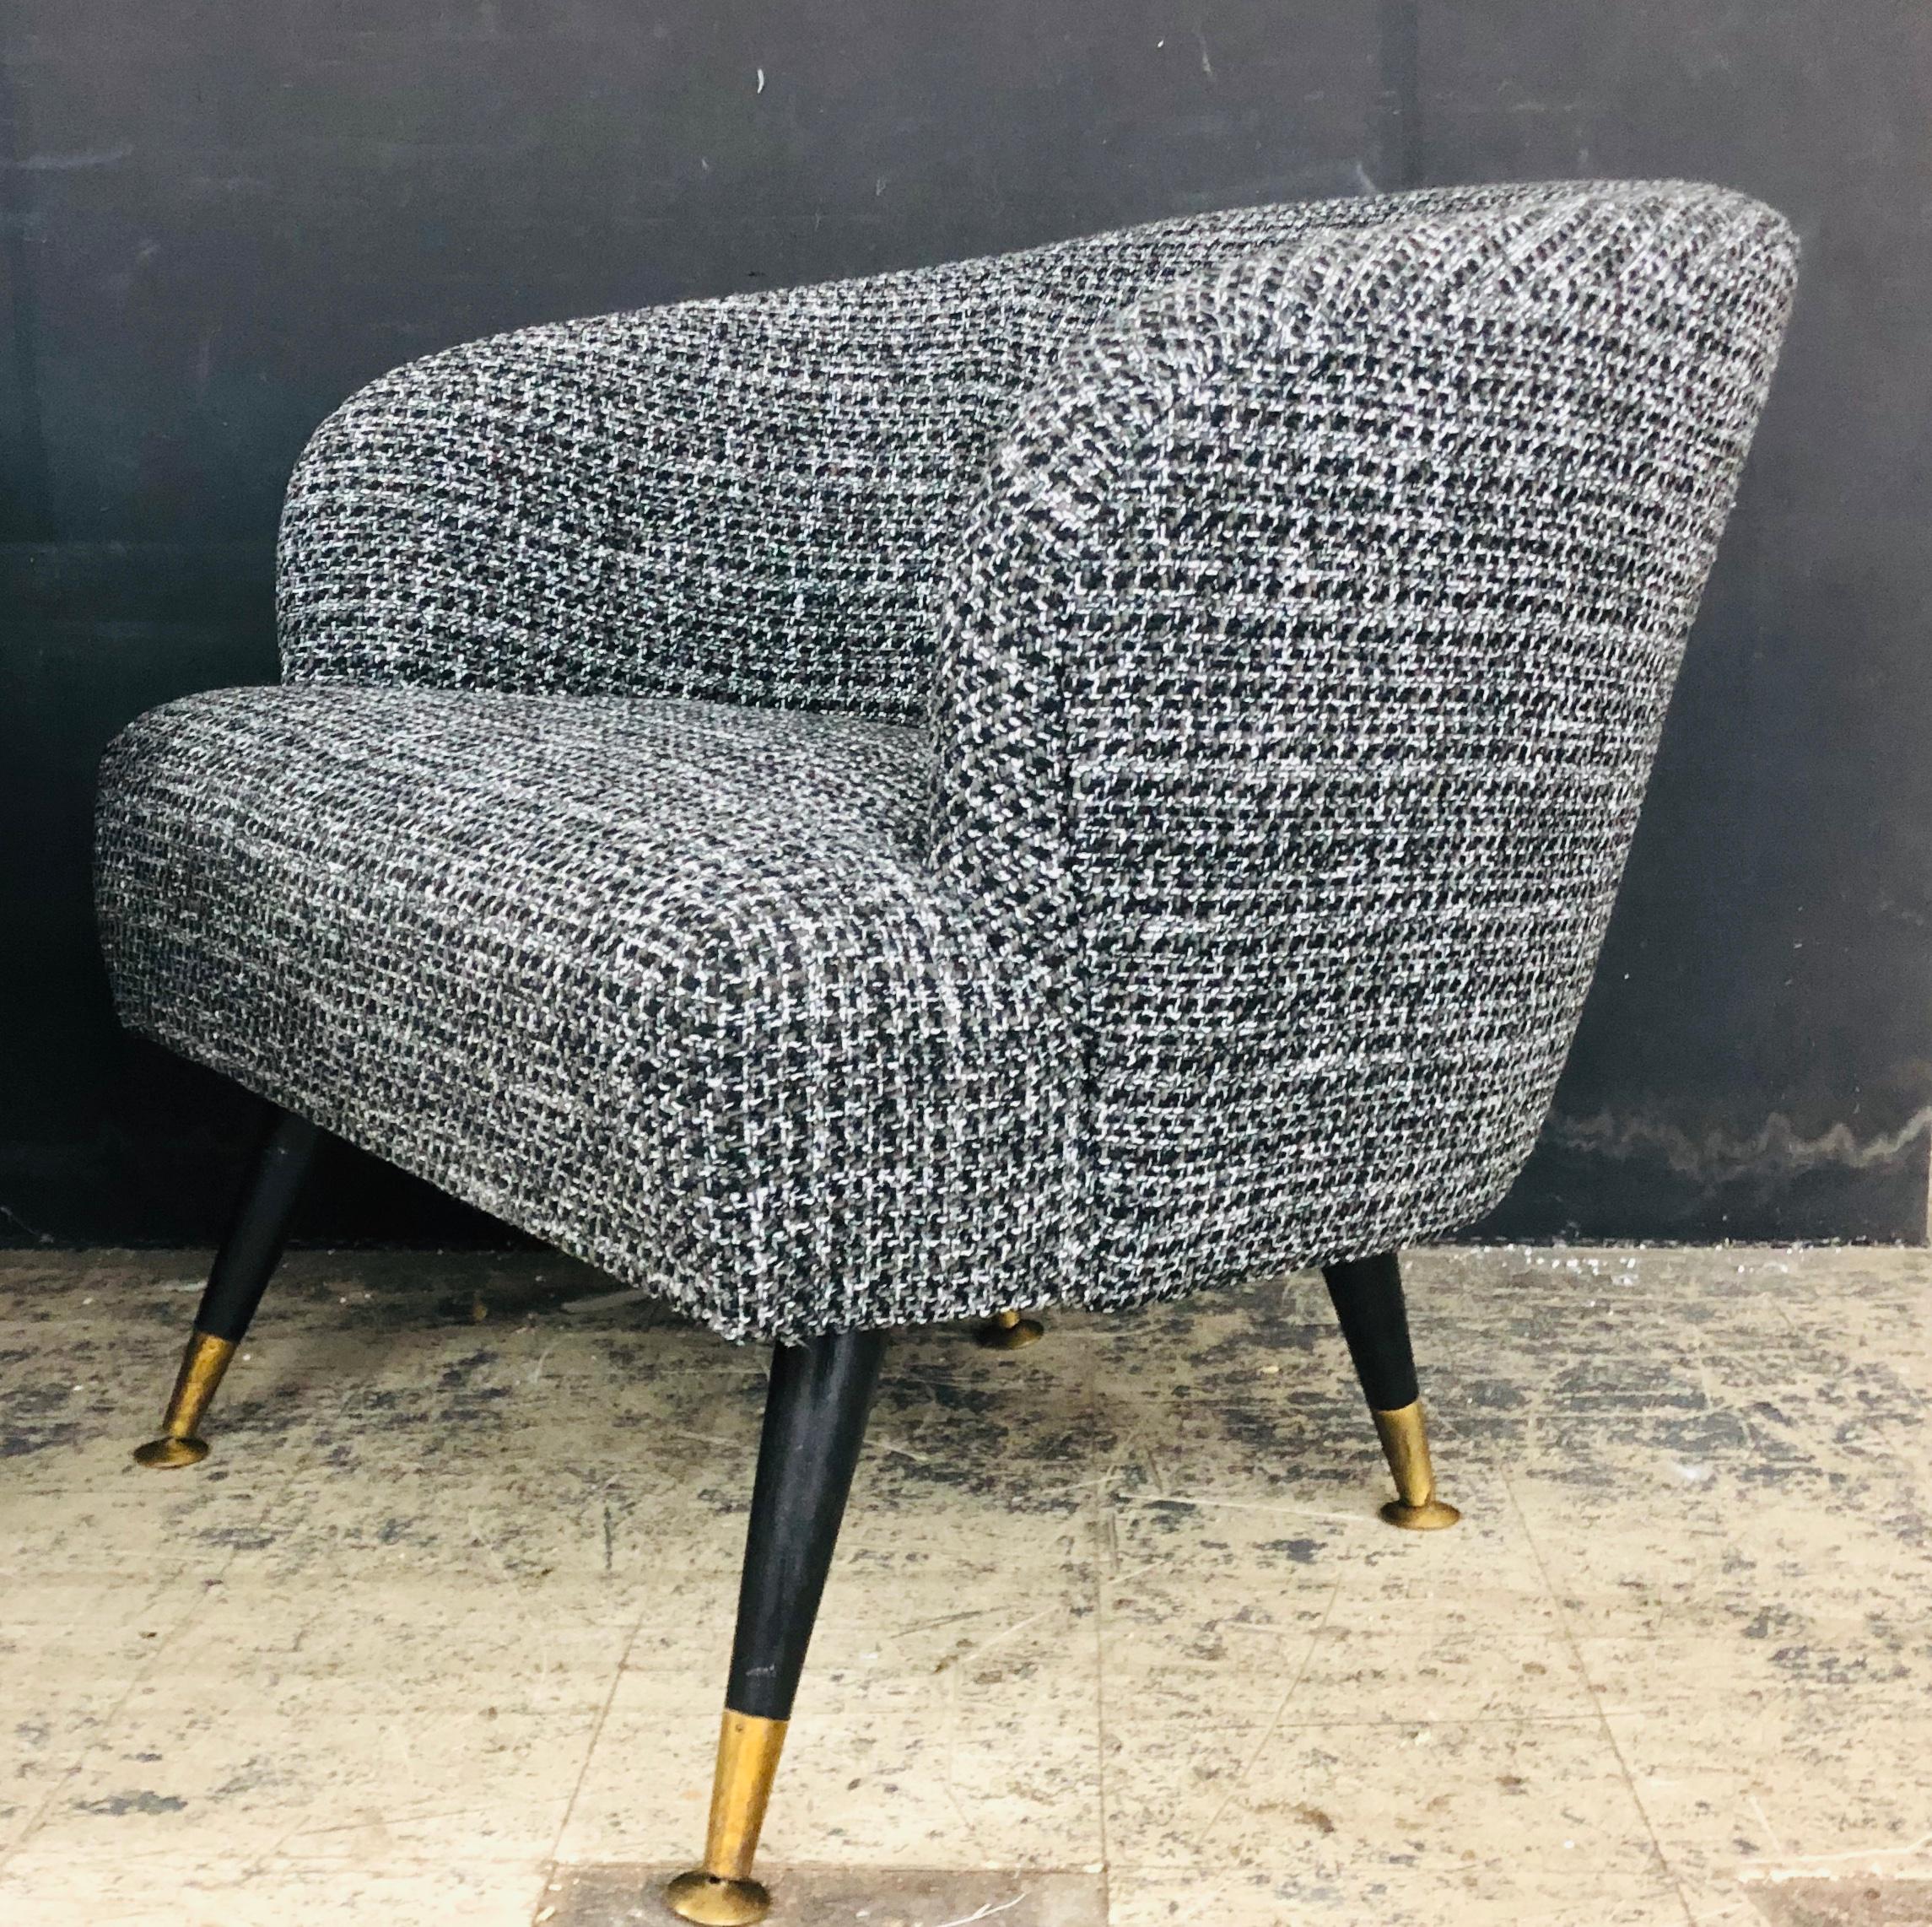 Fully restored Mid-Century Modern barrel backed club chairs. The feet are original with self-leveling sabots. The fabric is a rich, loosely woven blend of black, white and gray.